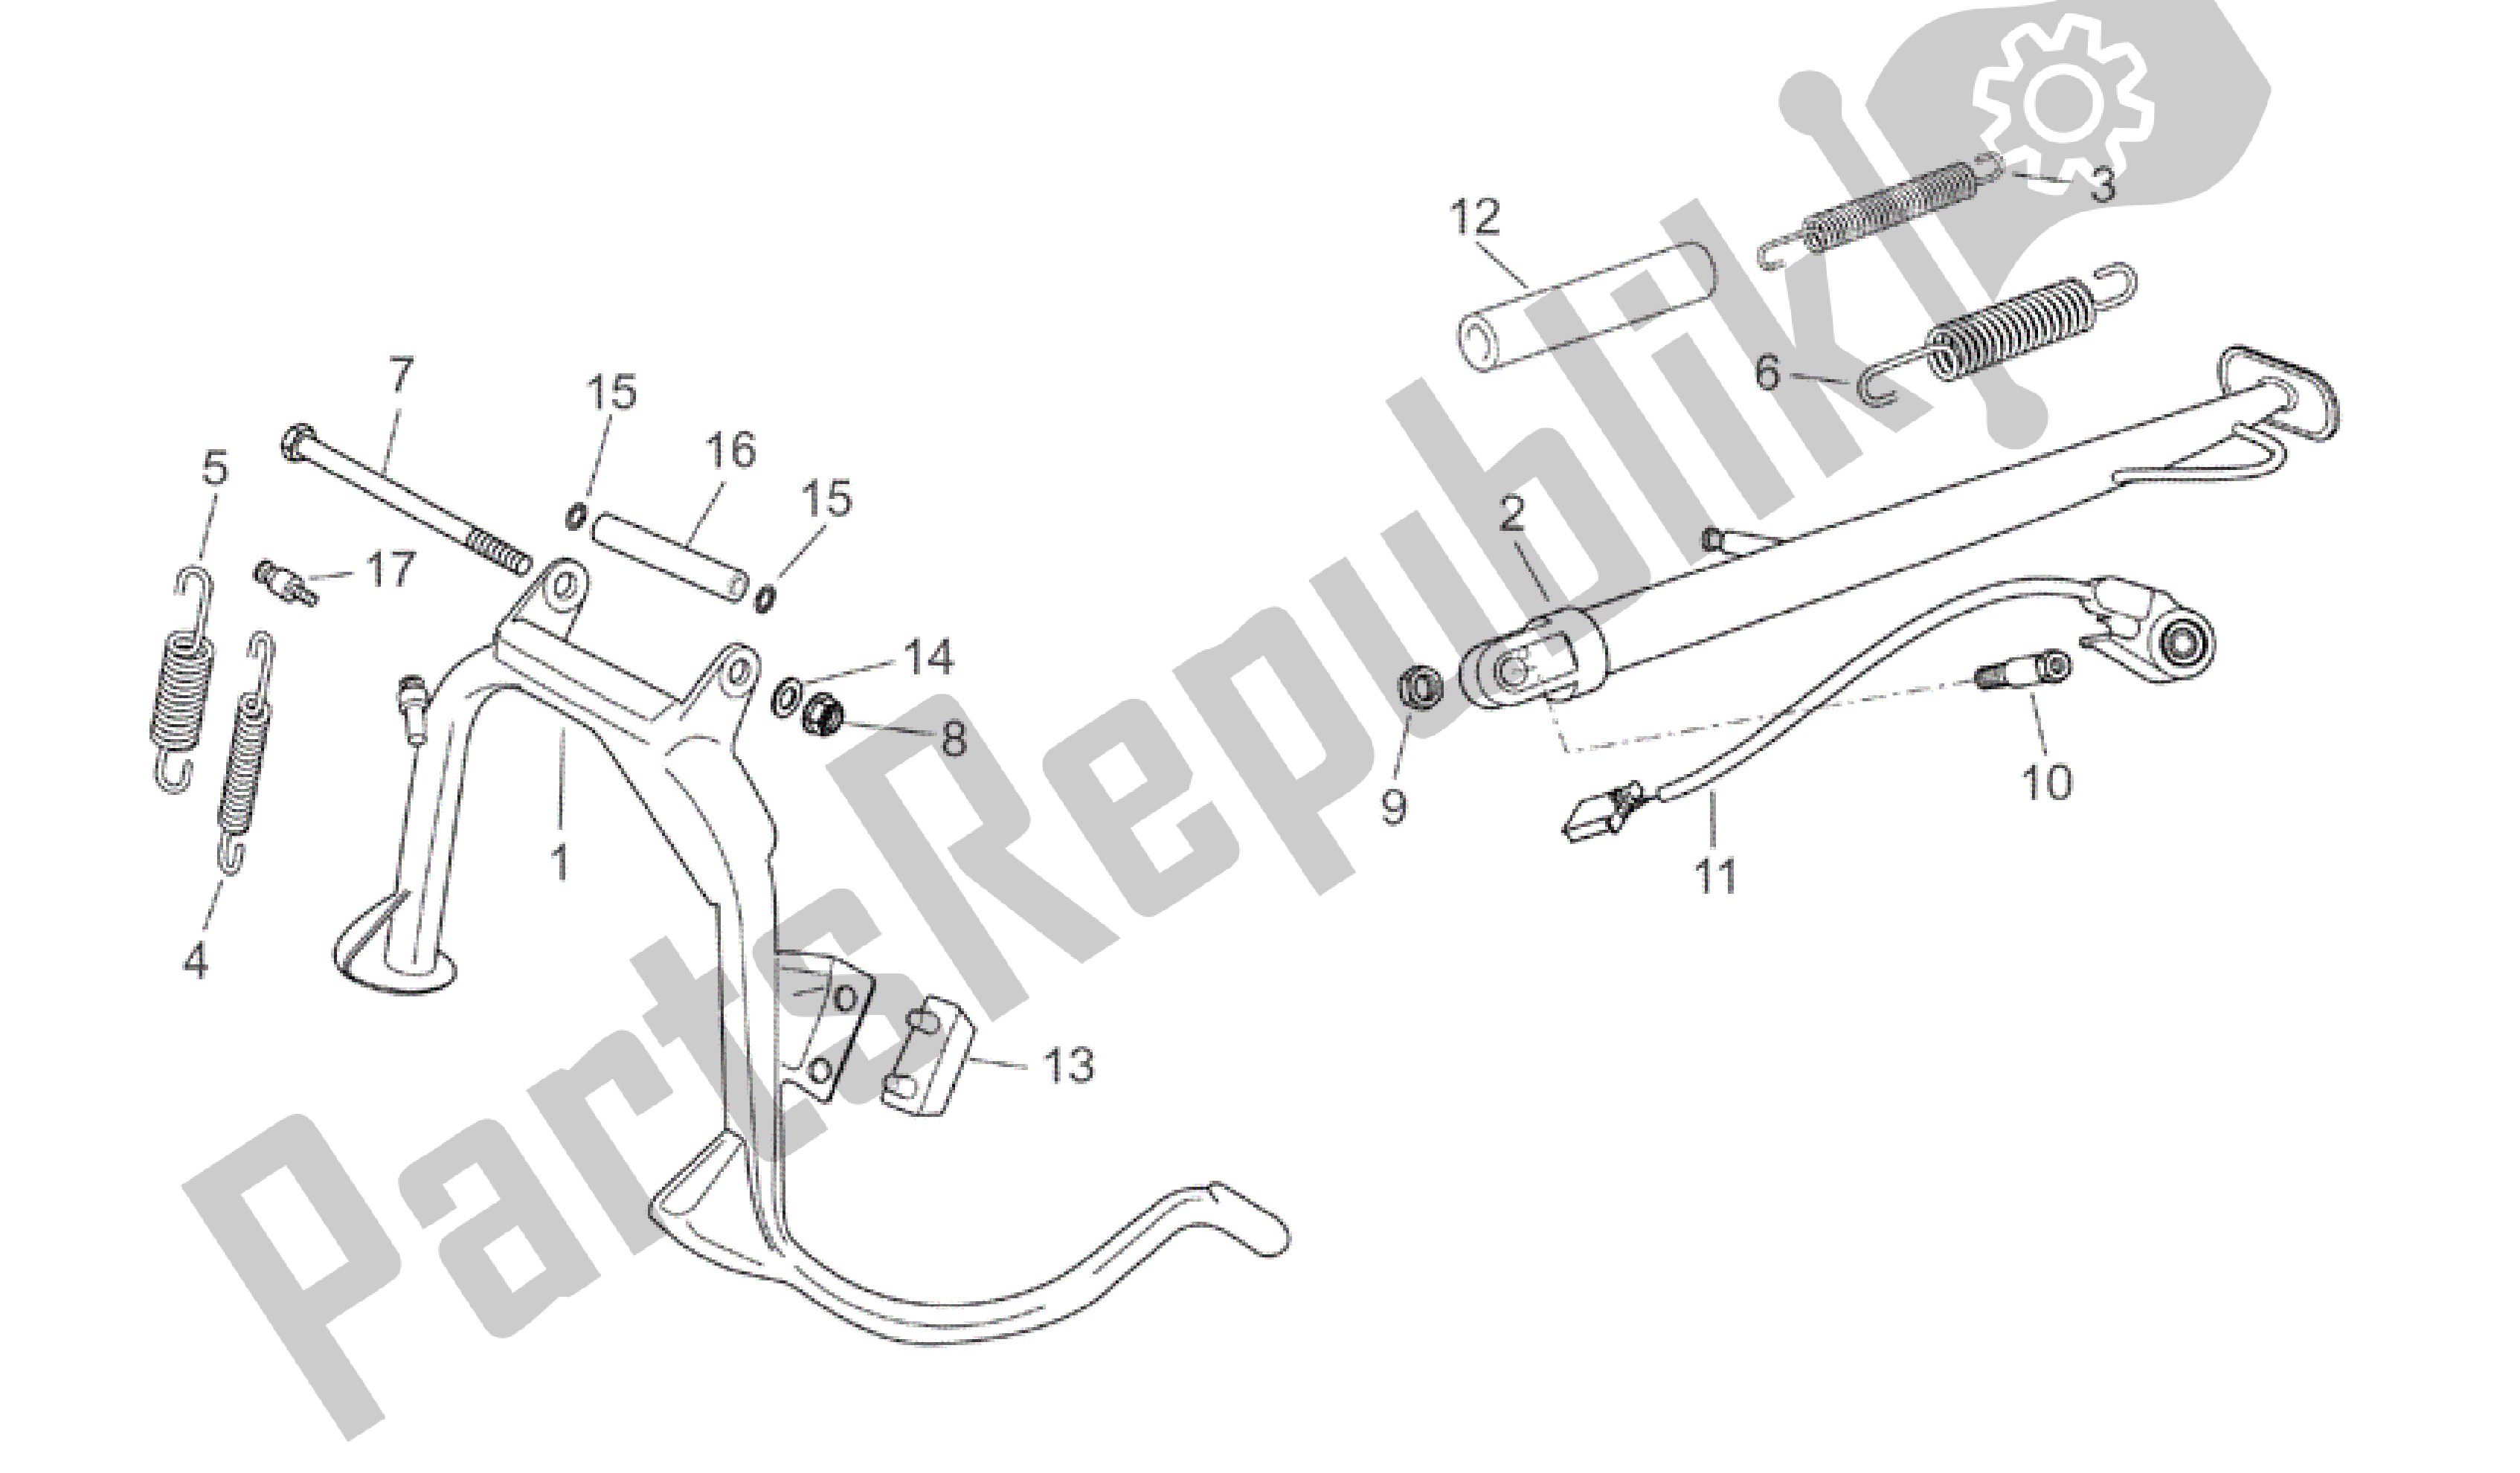 All parts for the Central Stand of the Aprilia Atlantic 125 2003 - 2006